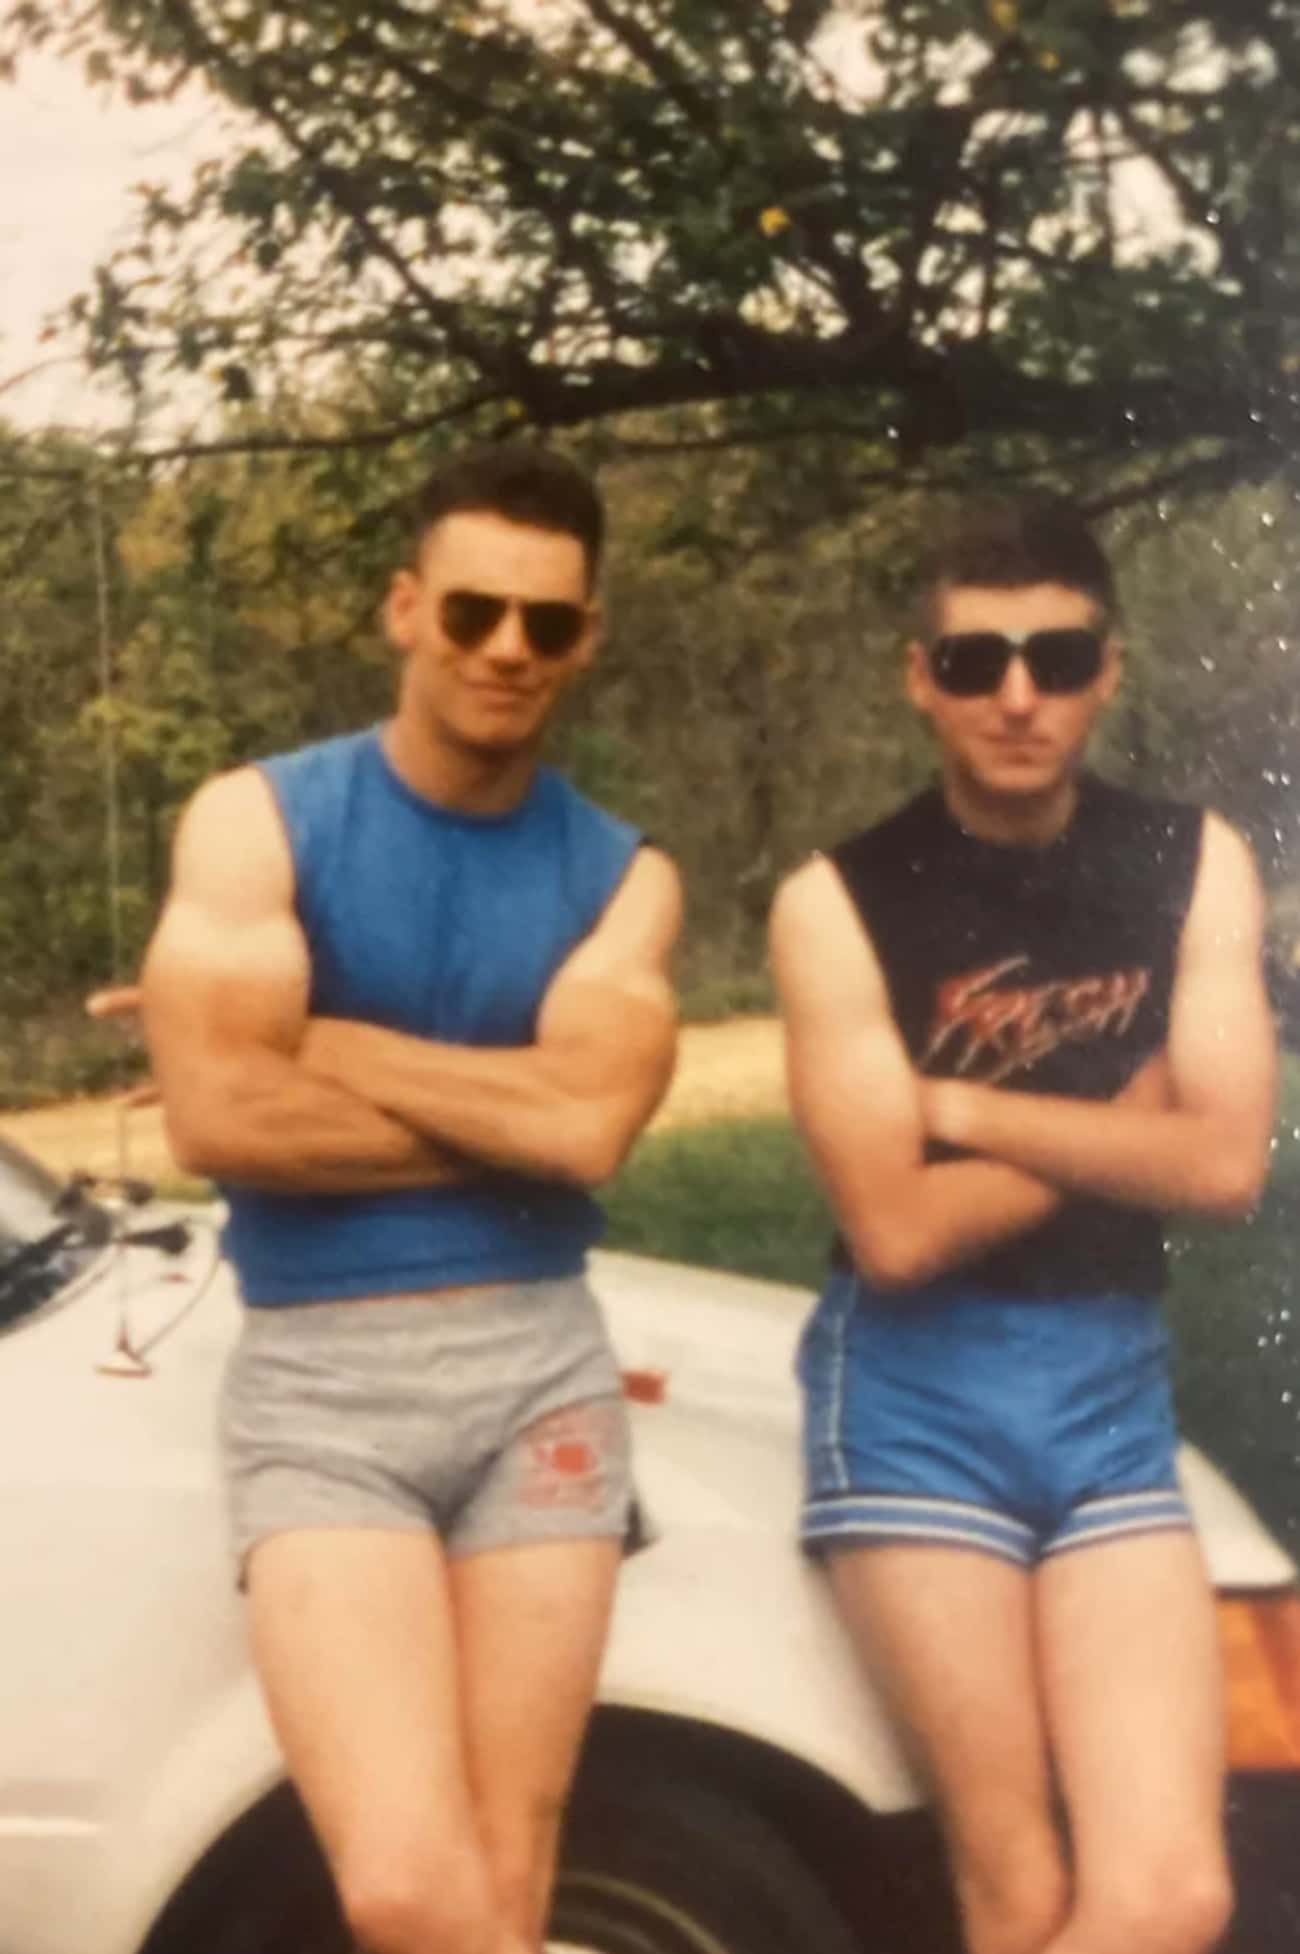 23 Photos We Found This Week That Are The Definition Of Old-School Cool